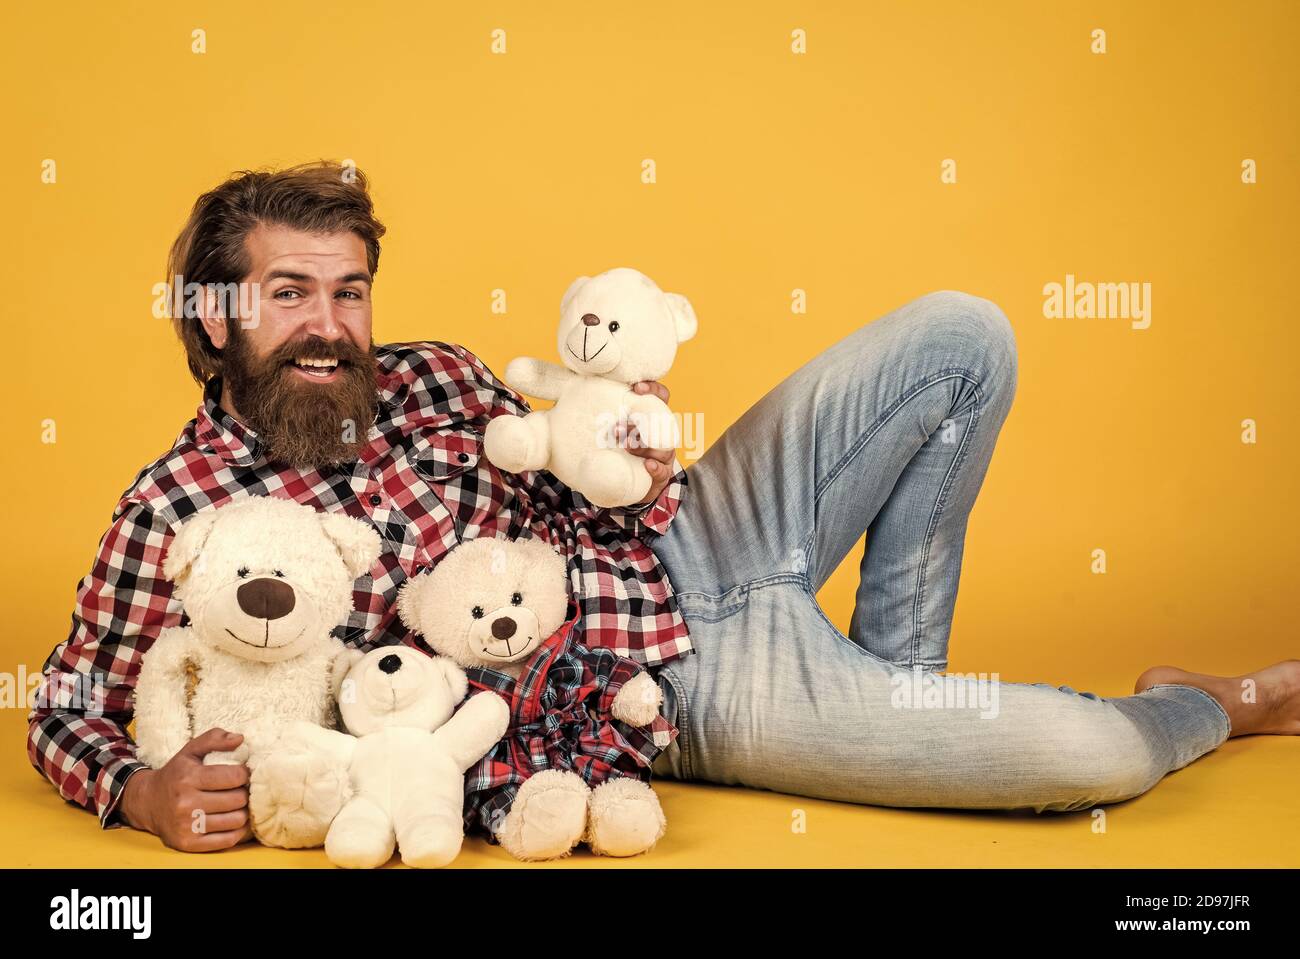 good mood. Birthday holiday party celebration. feel happiness. Man with beard hold cute toy bear. Man holds teddy bear. Gifts and holidays concept. This is for you. hipster like animal toy. Stock Photo